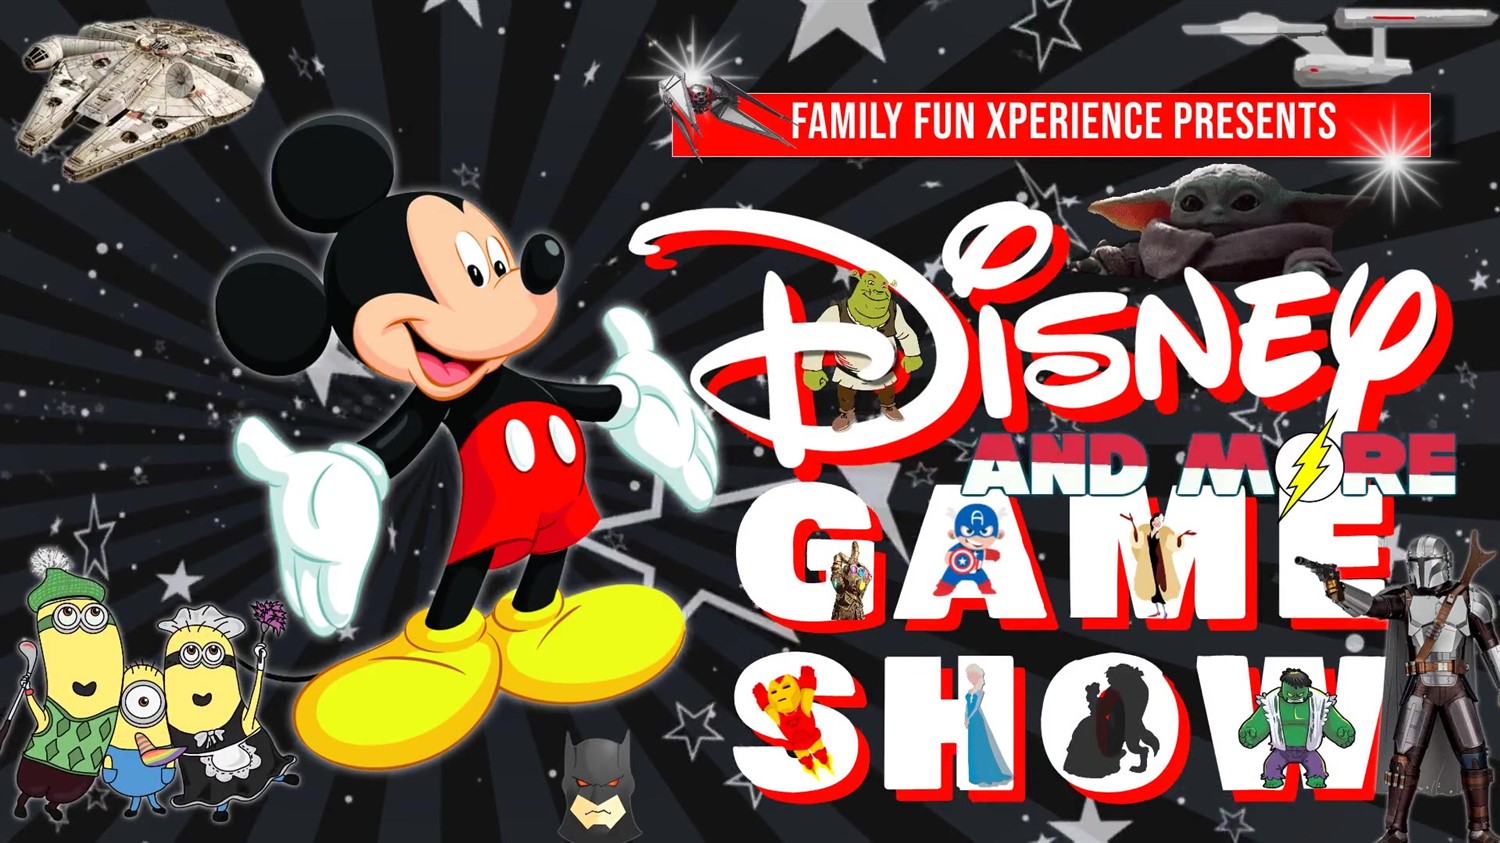 DISNEY & MORE GAME SHOW Animation, movies, sci-fi, superheroes, & much more! on Jul 26, 19:00@FFX Theatre - Pick a seat, Buy tickets and Get information on Family Fun Xperience tickets.ffxshow.org